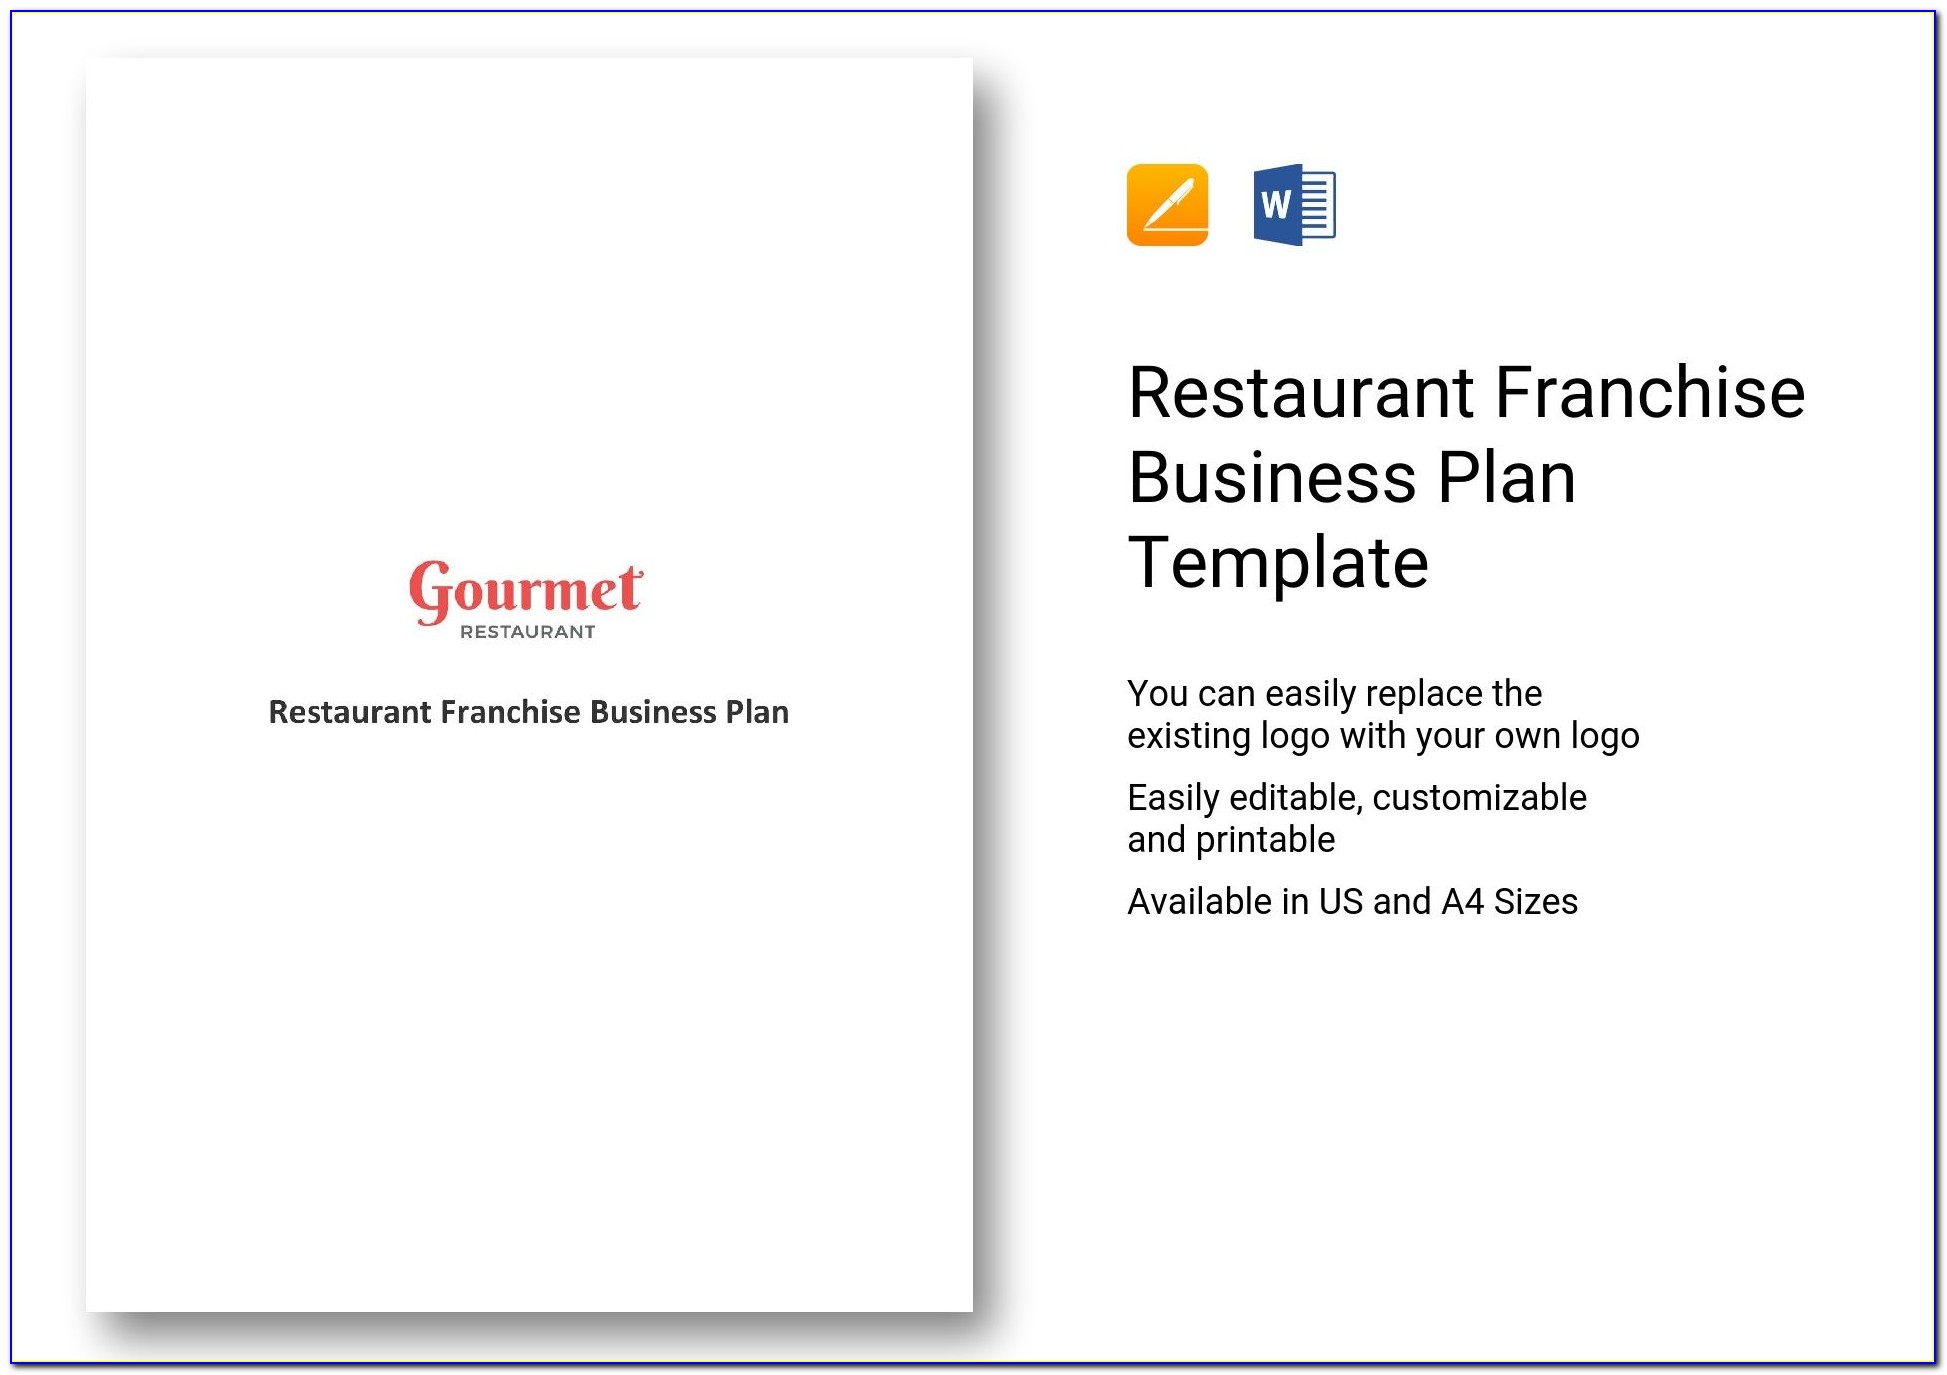 Food Franchise Business Plan Template